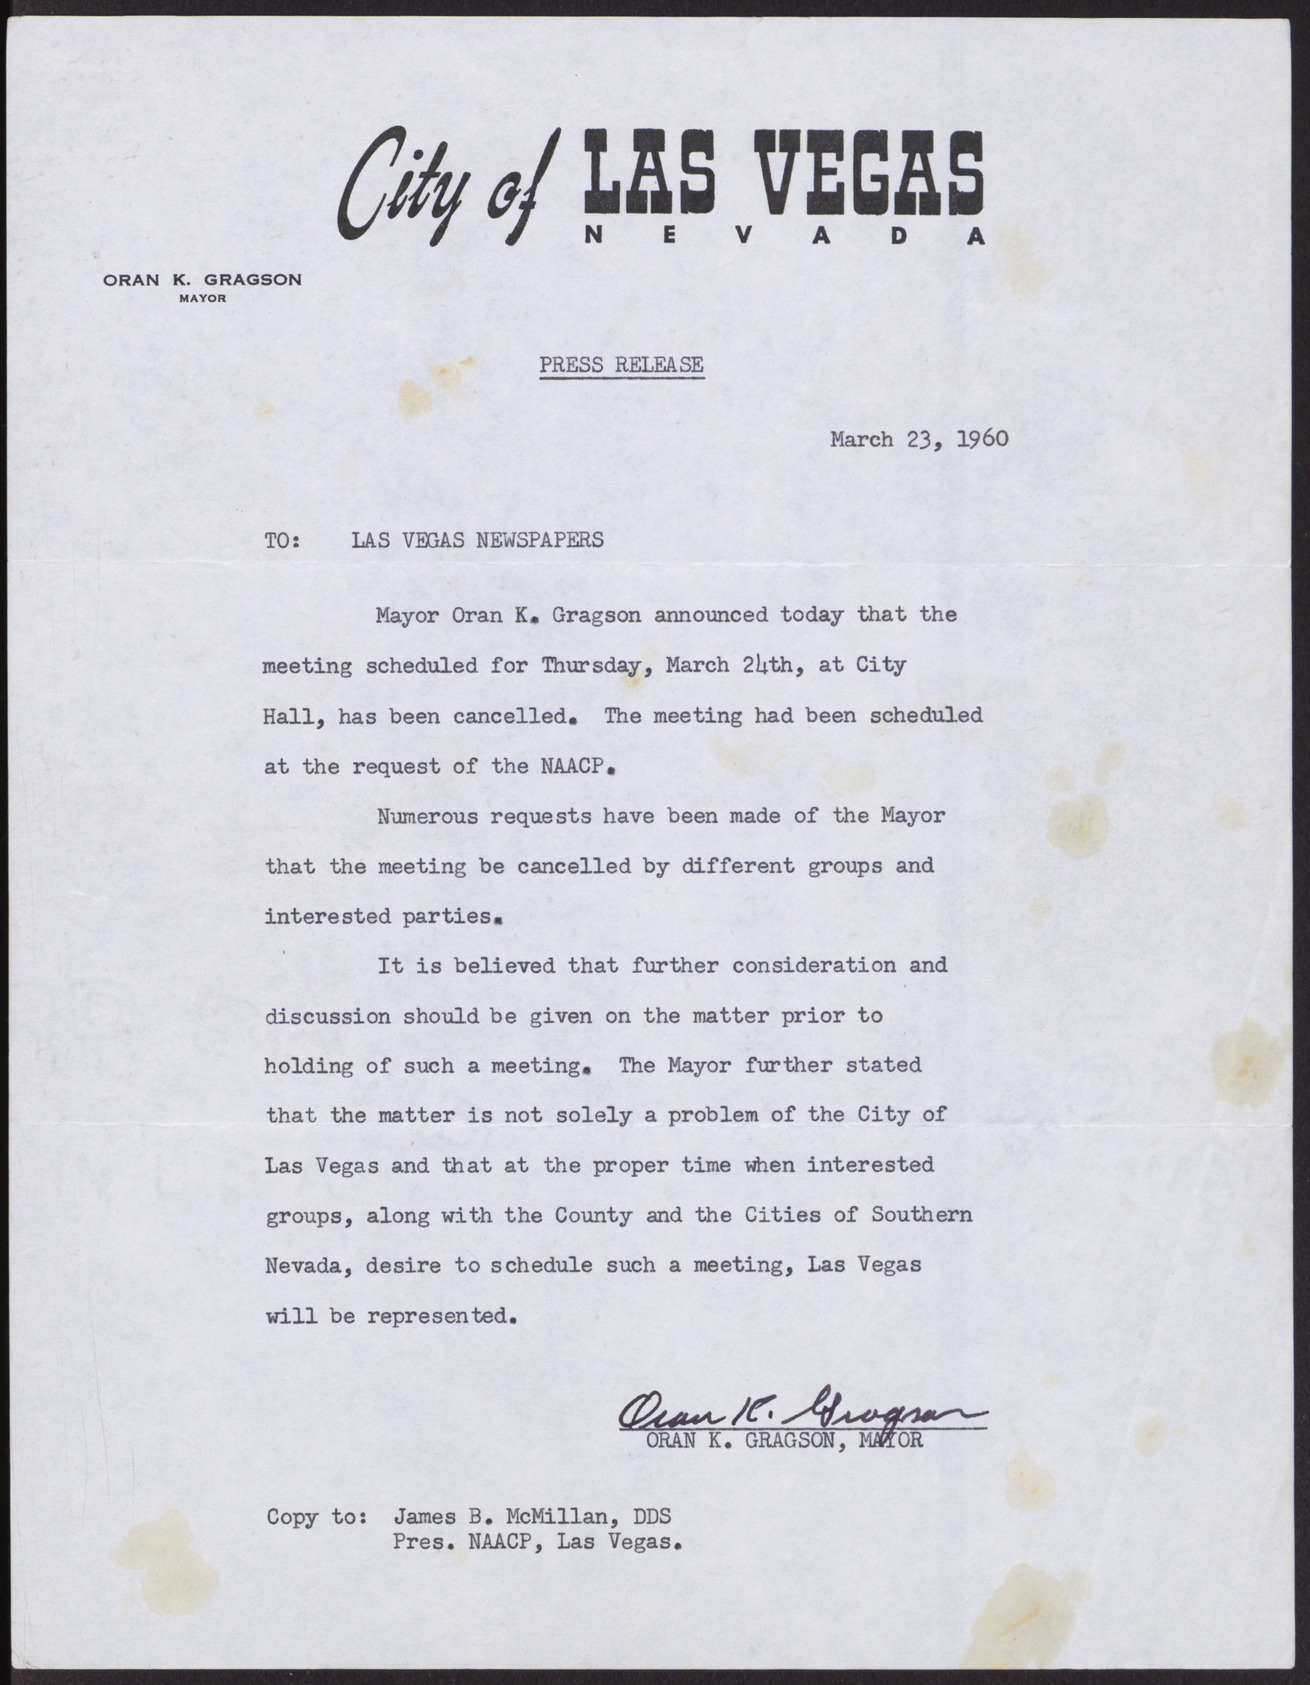 Letter to Las Vegas Newspapers from Orkan K. Gragson, Las Vegas Mayor, March 23, 1960